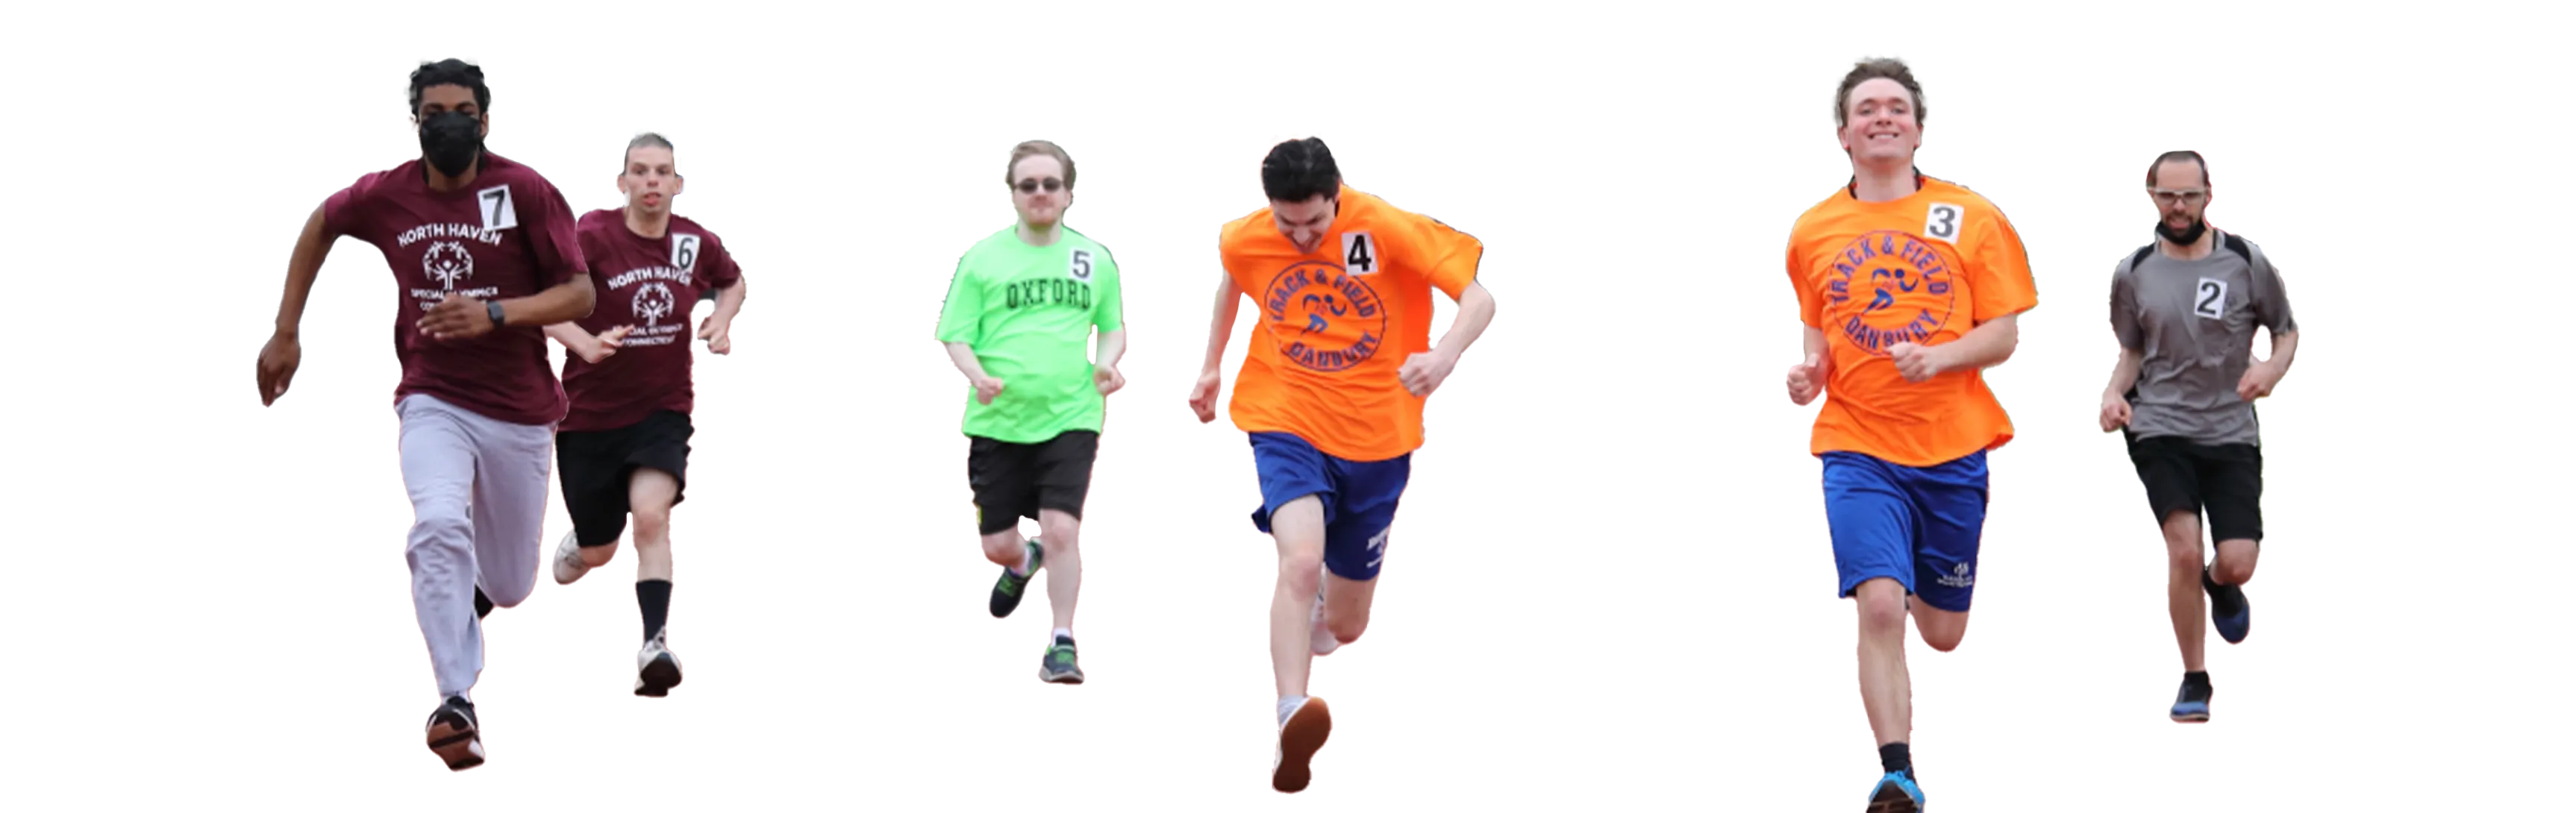 Two male athletes running. One is wearing a neon green t-shirt and the other is wearing a neon orange t-shirt.